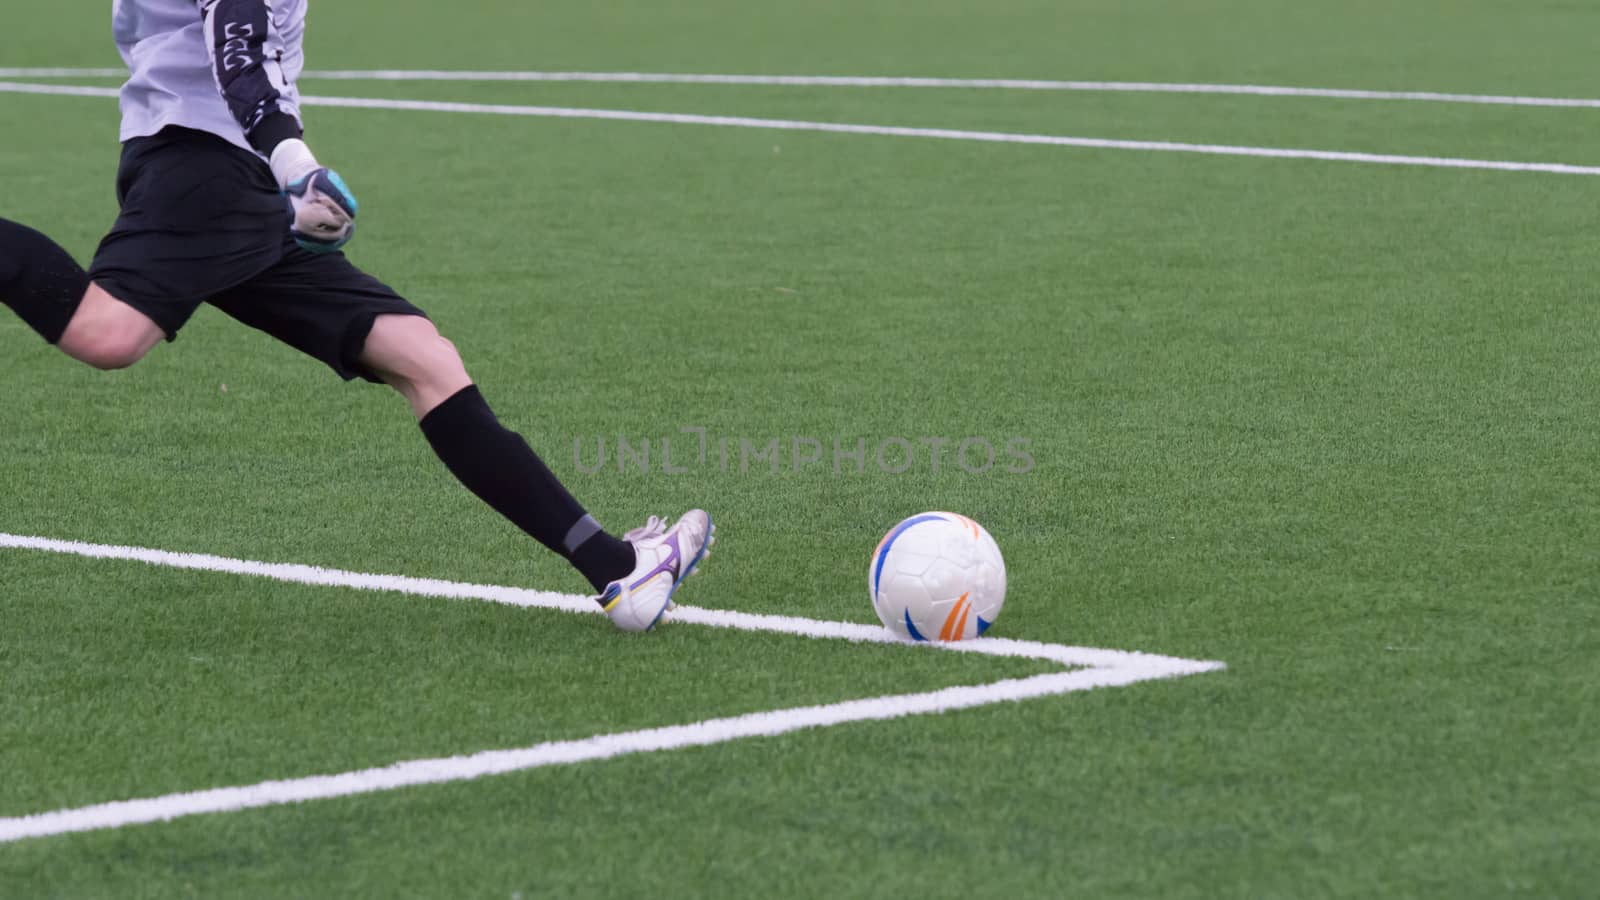 soccer goalkeeper in action during a match